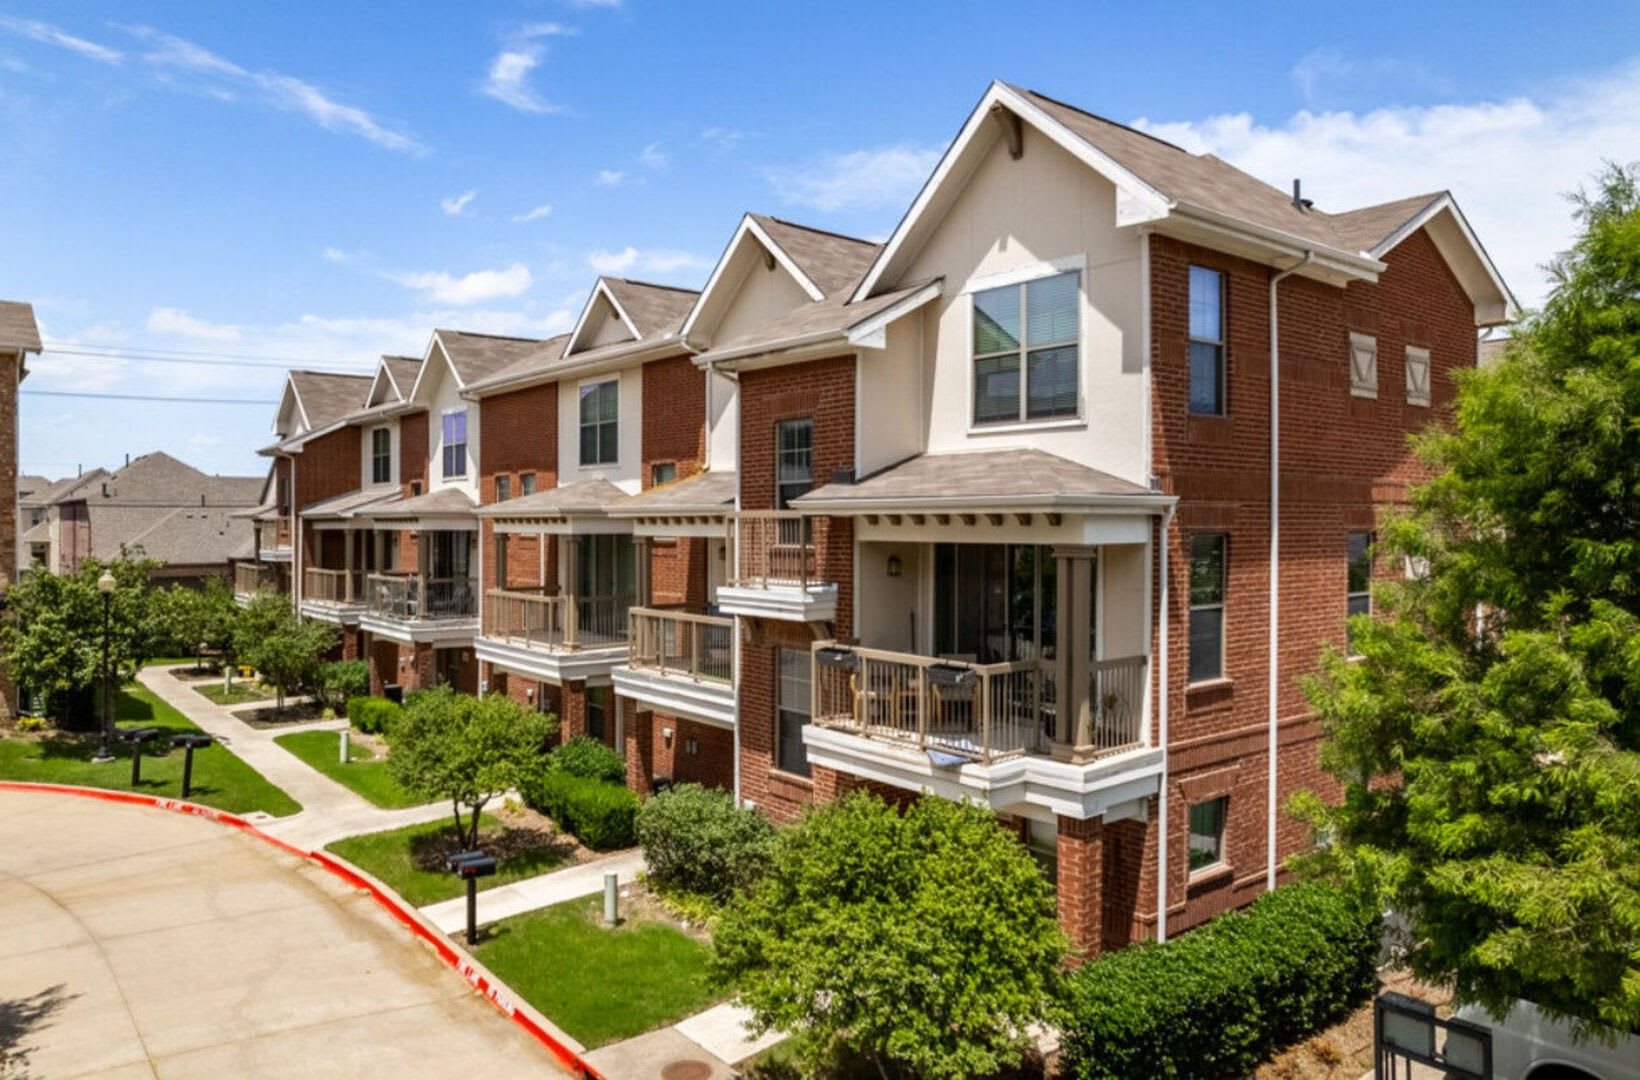 Townhome exteriors with balconies at Parkside Towns in Richardson, Texas